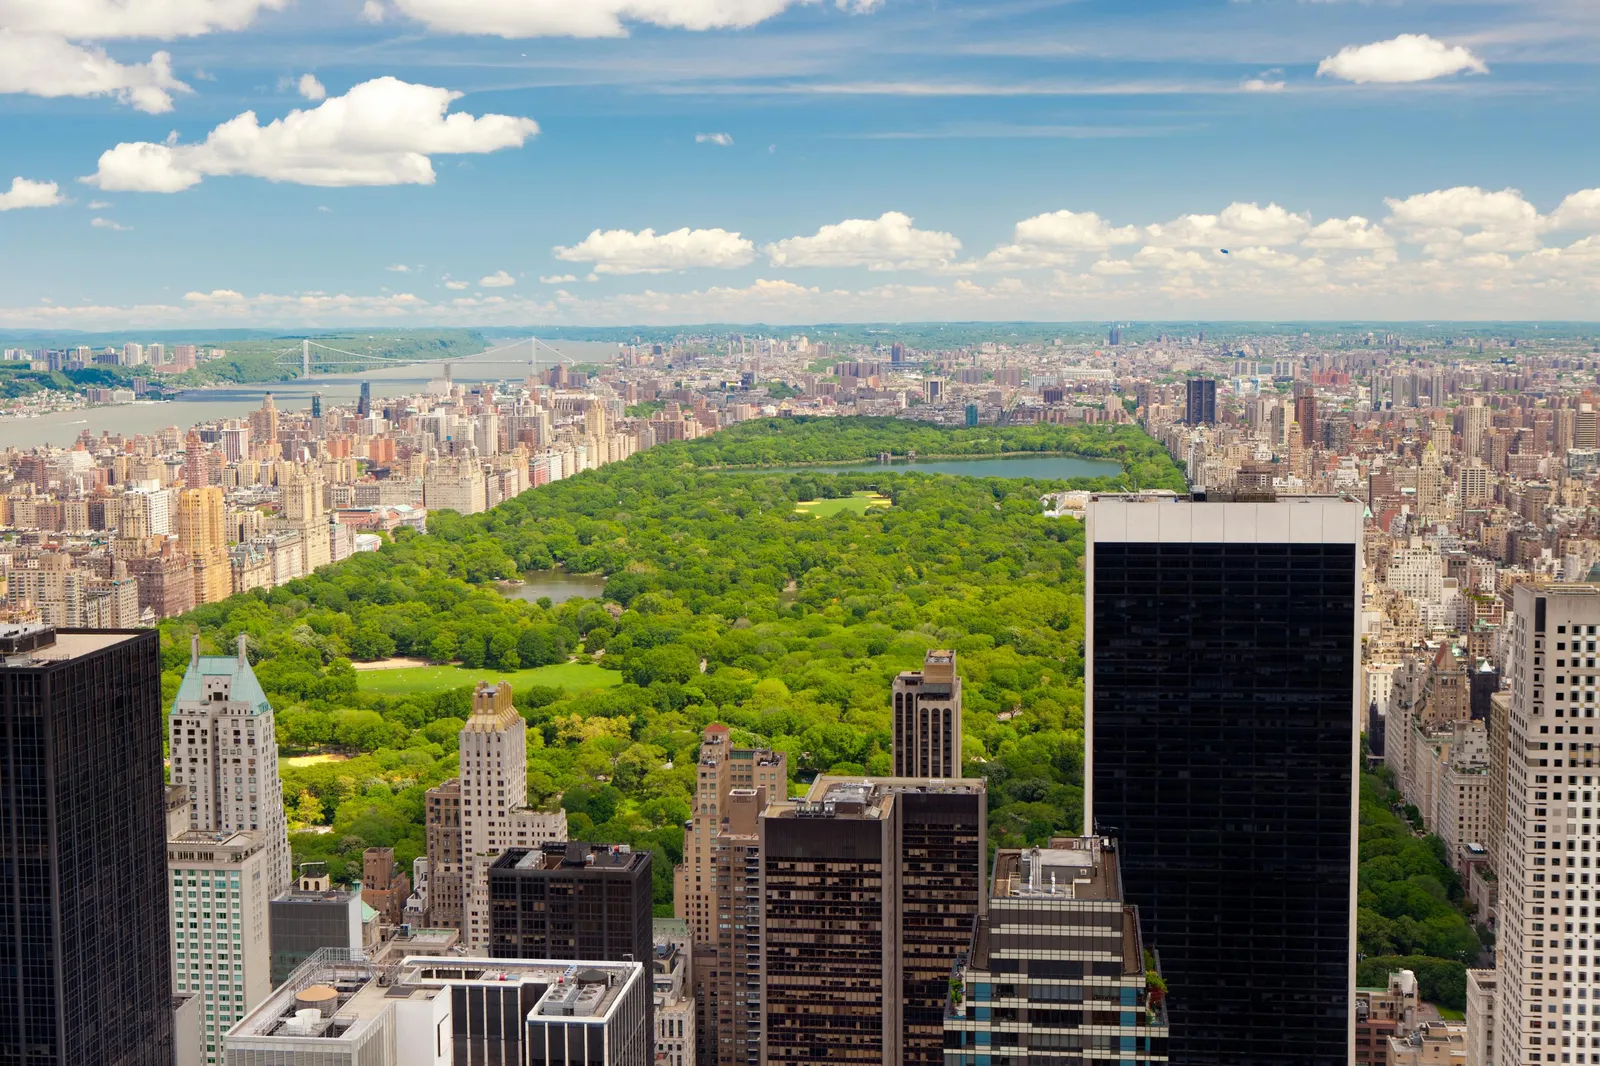 12 Interesting Facts About New York City